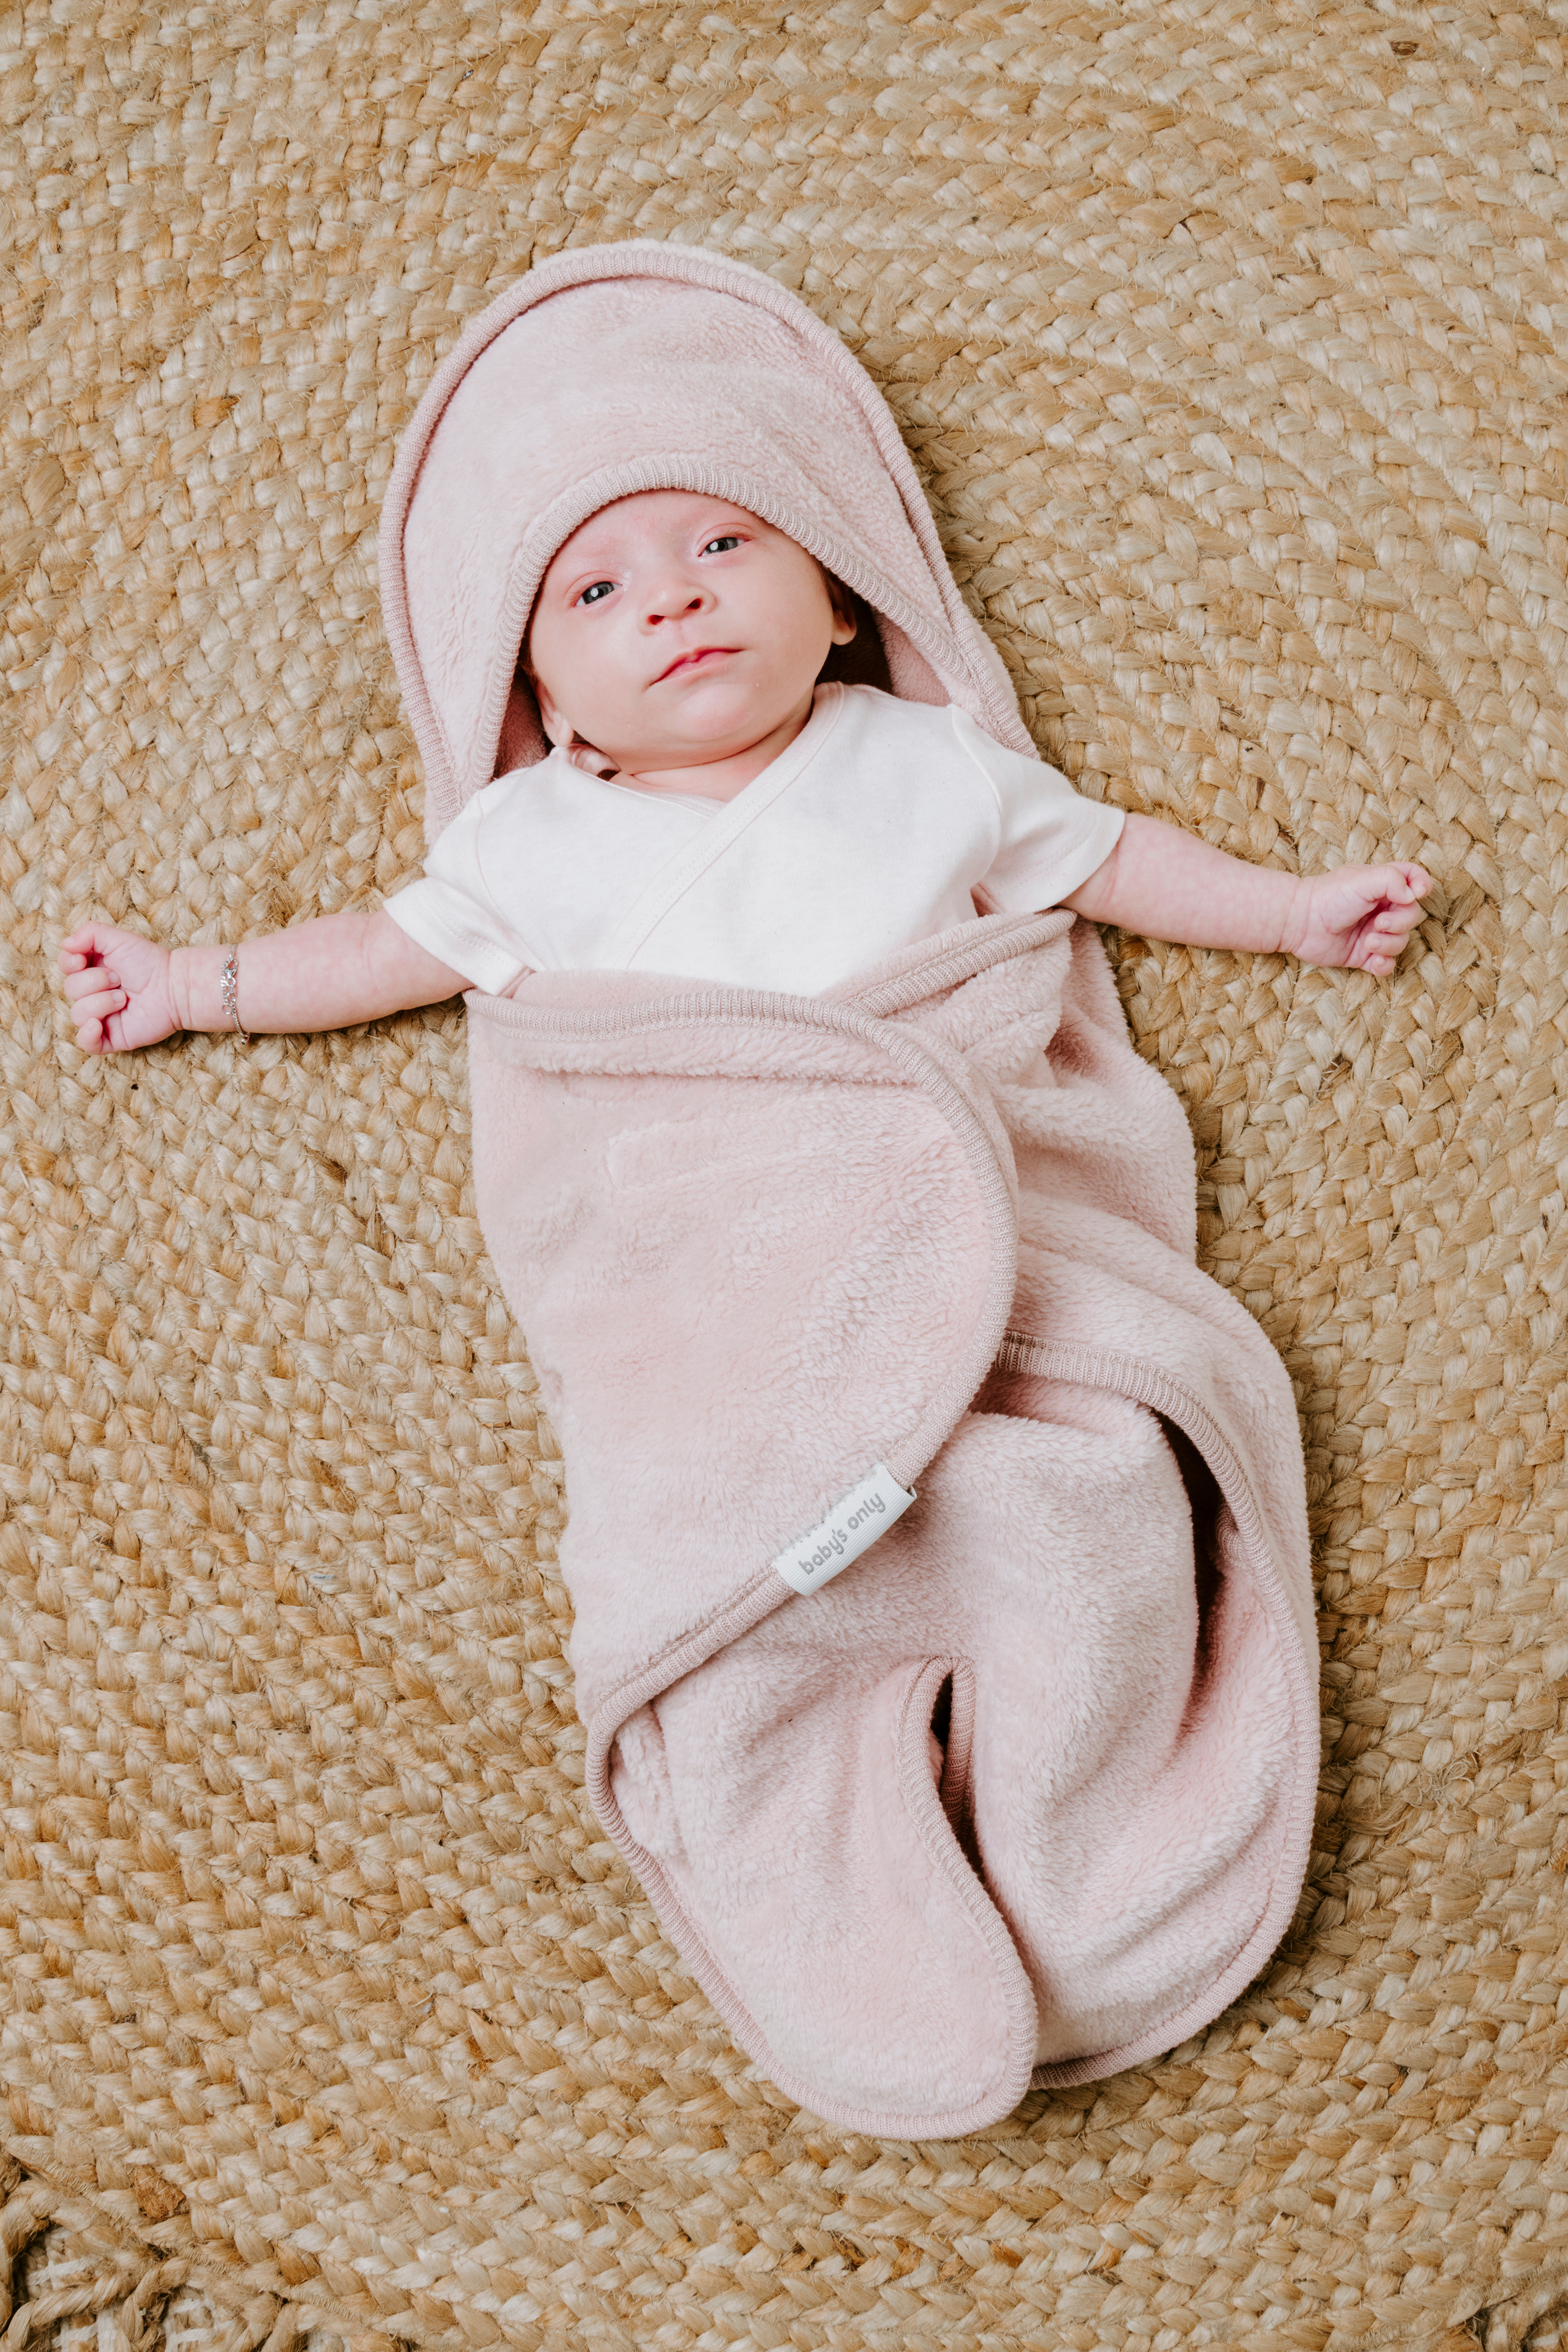 Hooded baby blanket with feet Cozy warm linen